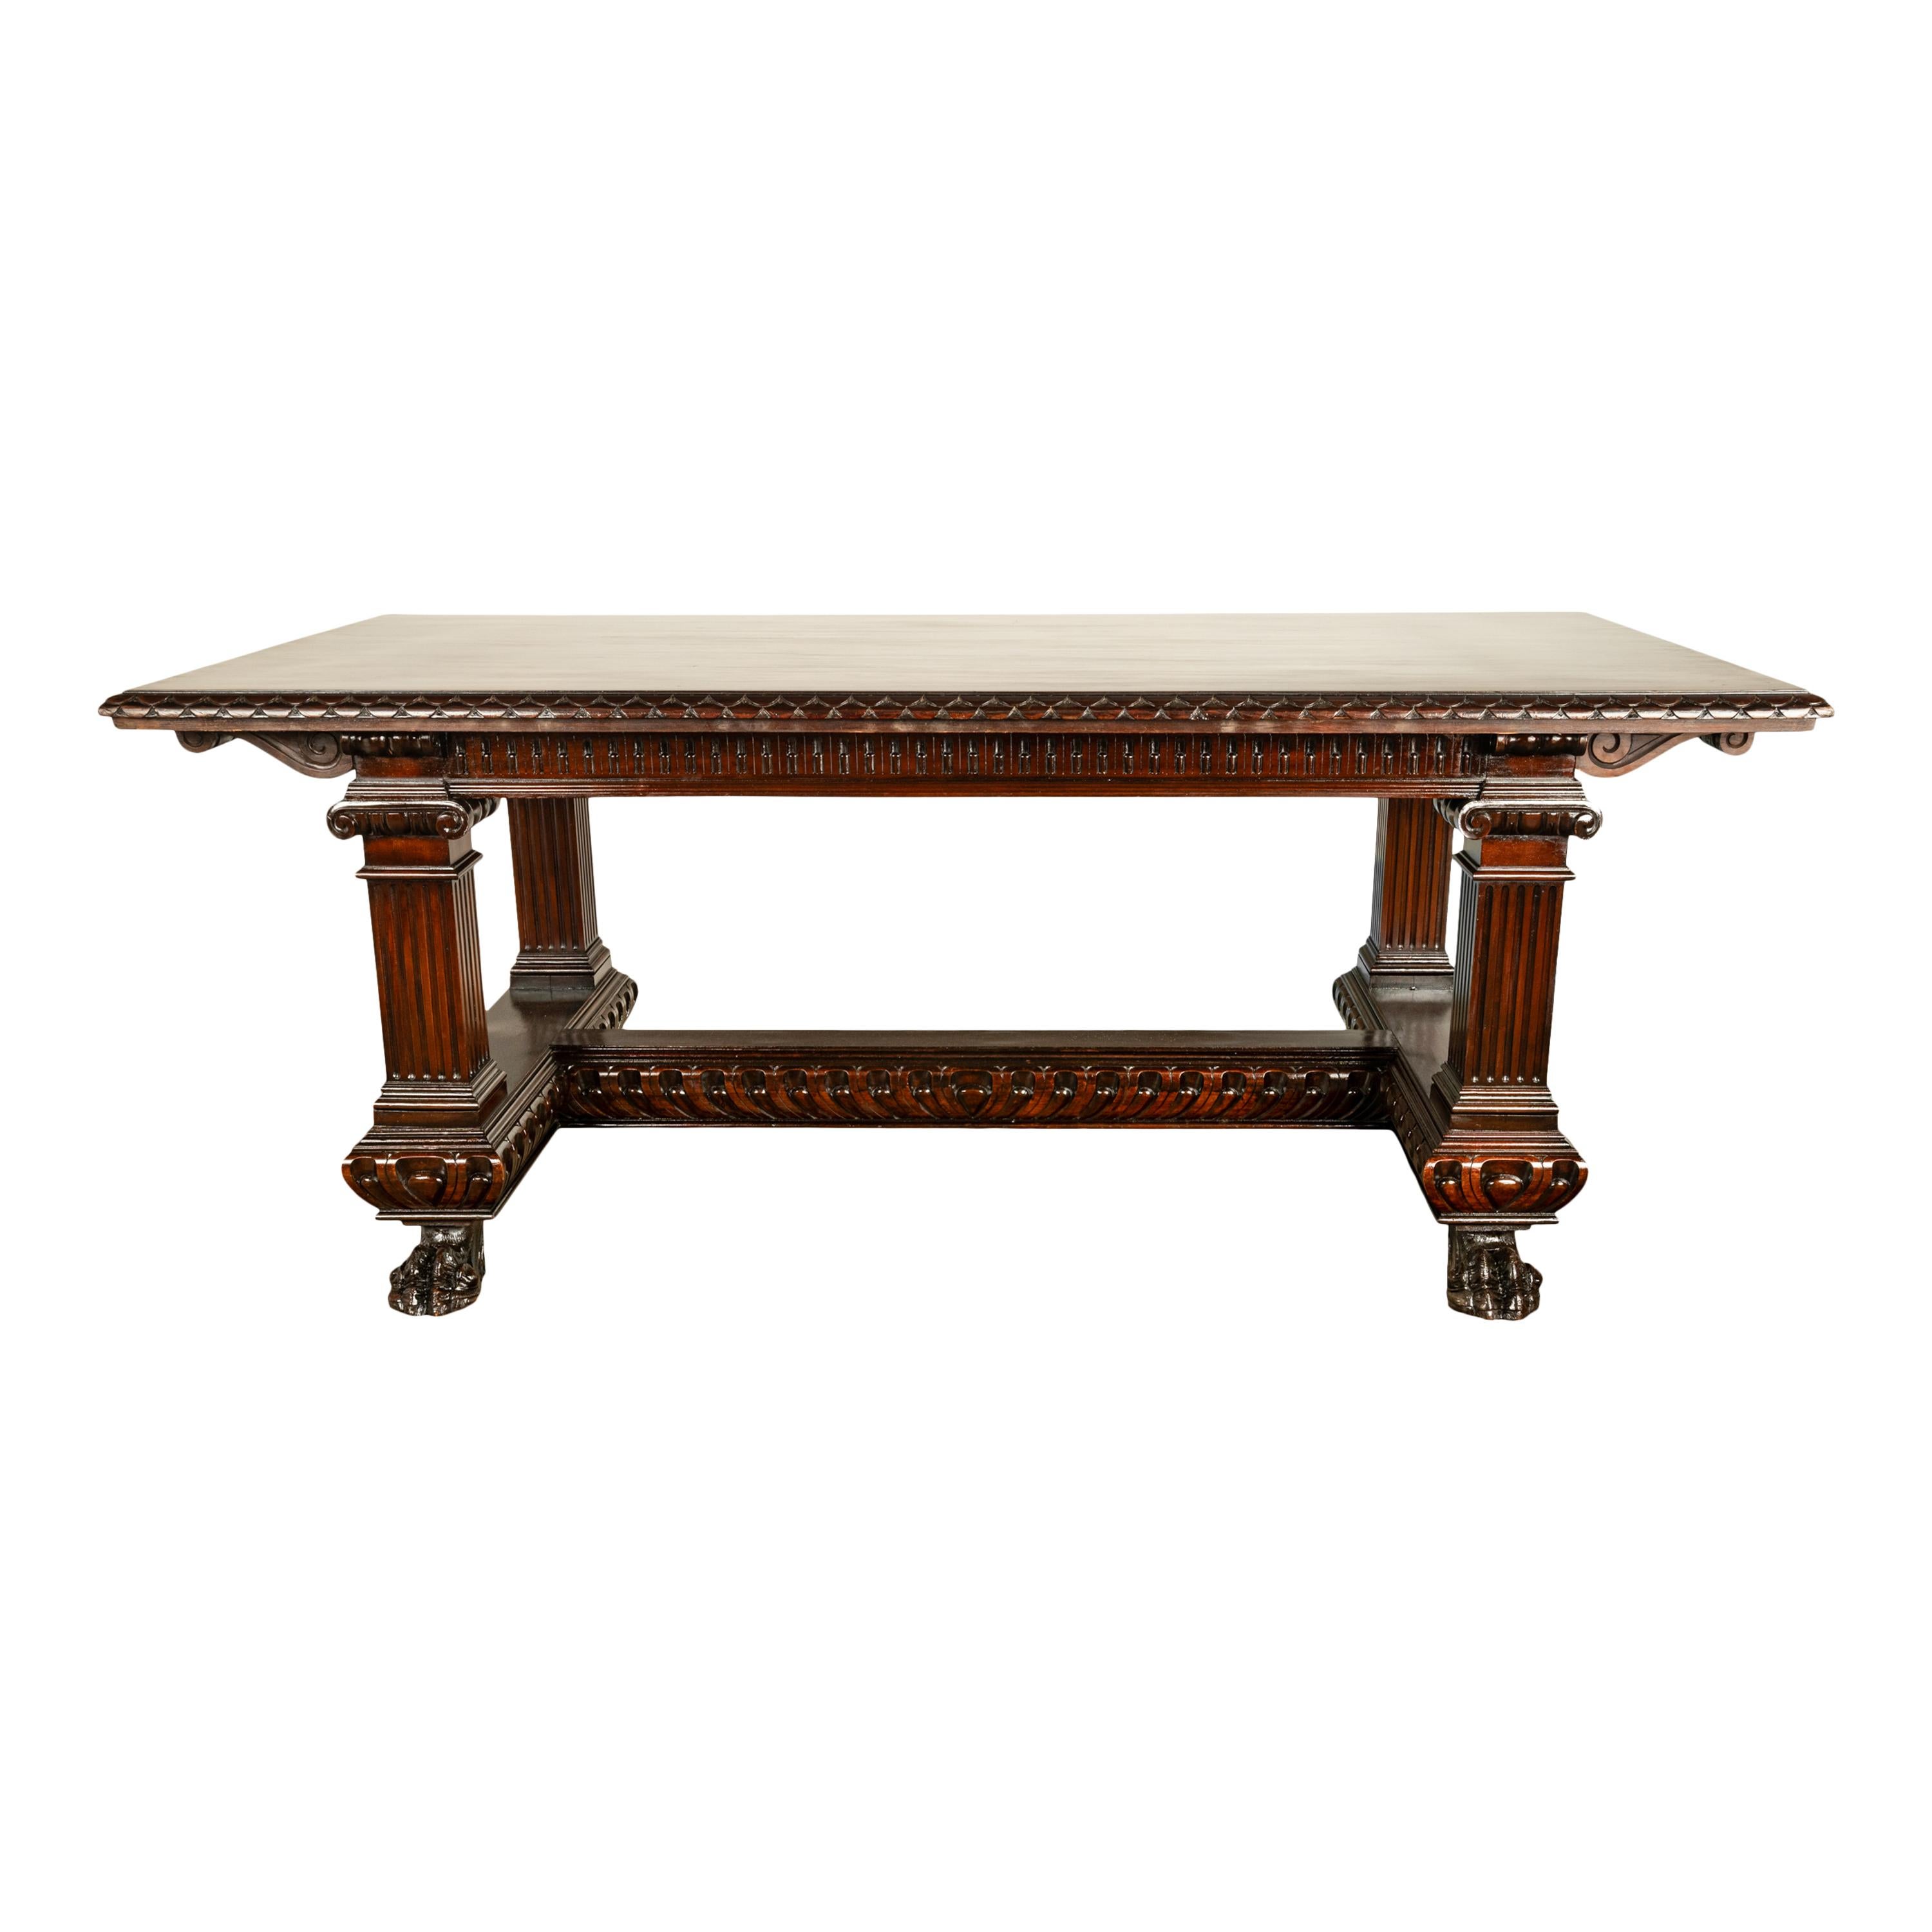 Antique Italian Carved Renaissance Revival Walnut Library Dining Table 1880 For Sale 1